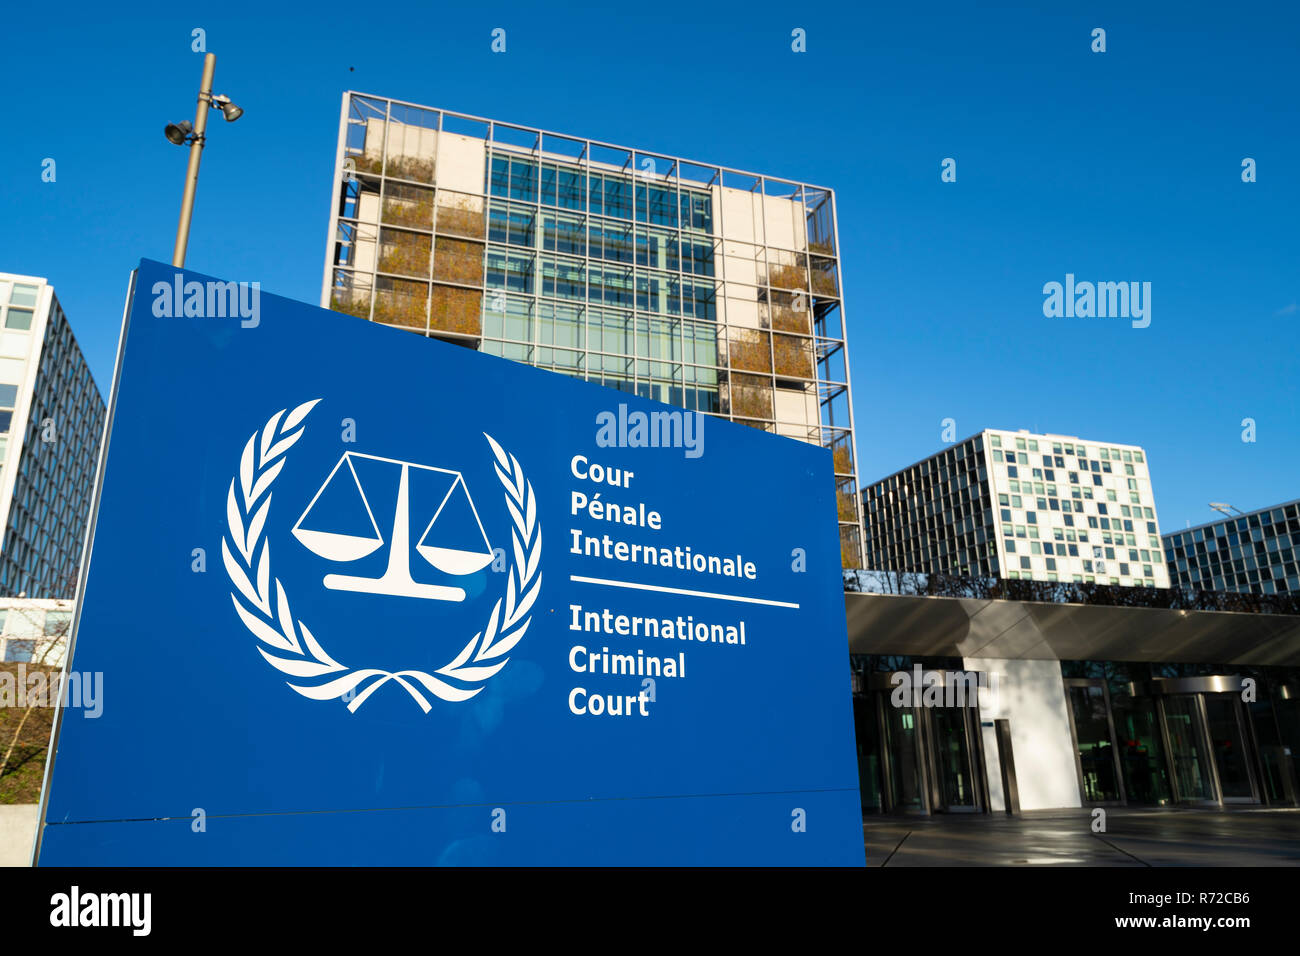 The new headquarters of the International Criminal Court , ICC, in The Hague, The Netherlands Stock Photo